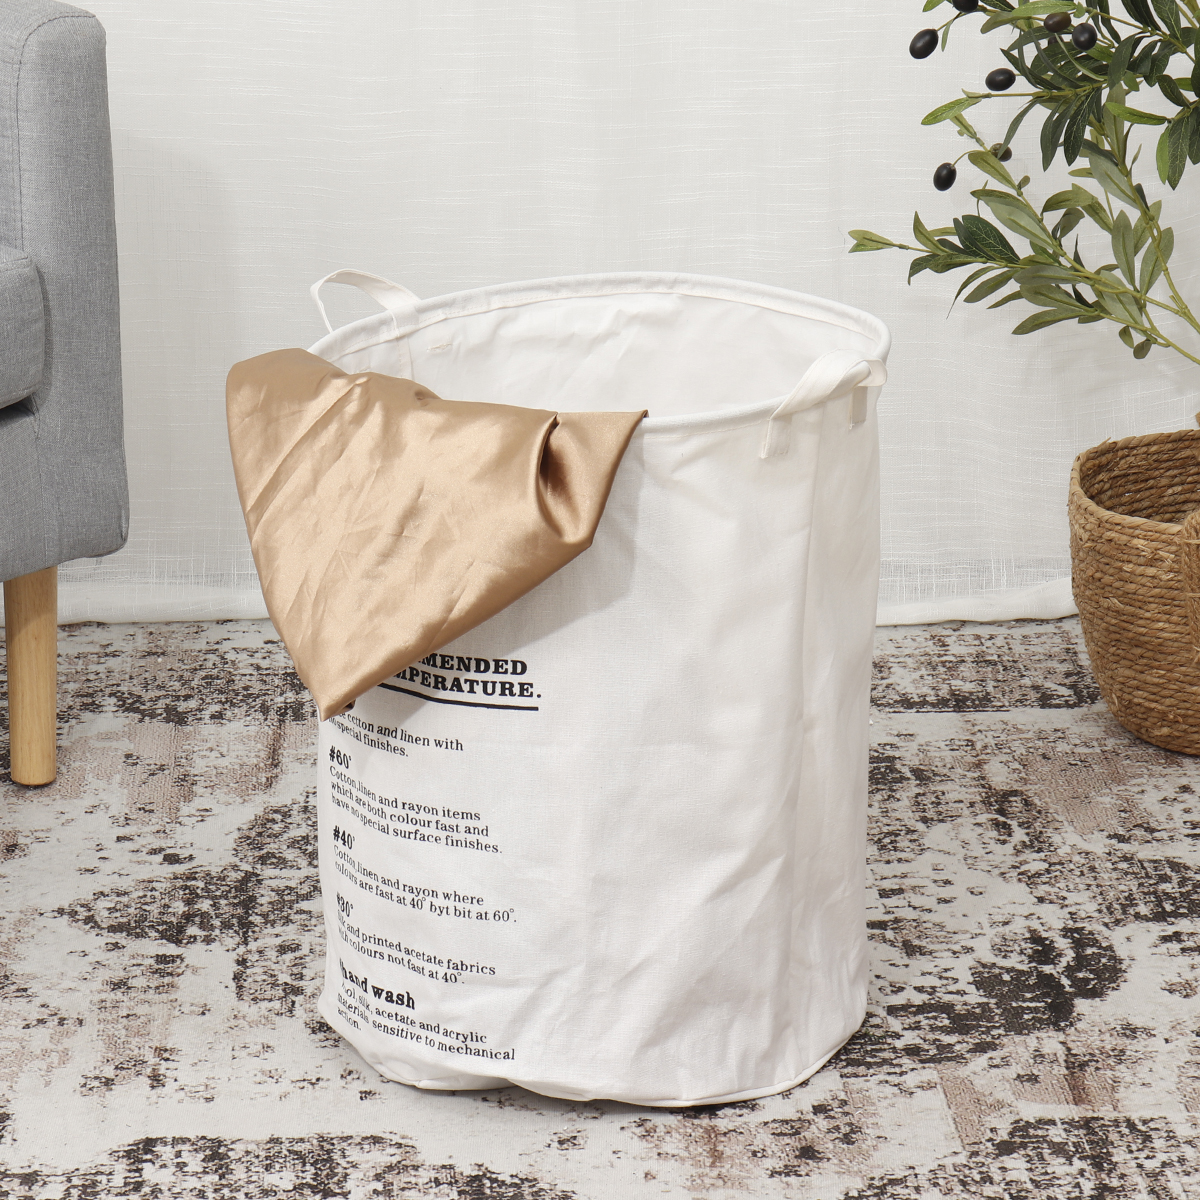 Foldable-Laundry-Basket-Round-Cotton-Linen-Collapsible-Washing-Hamper-Waterproof-Dirty-Clothes-Stora-1908165-6